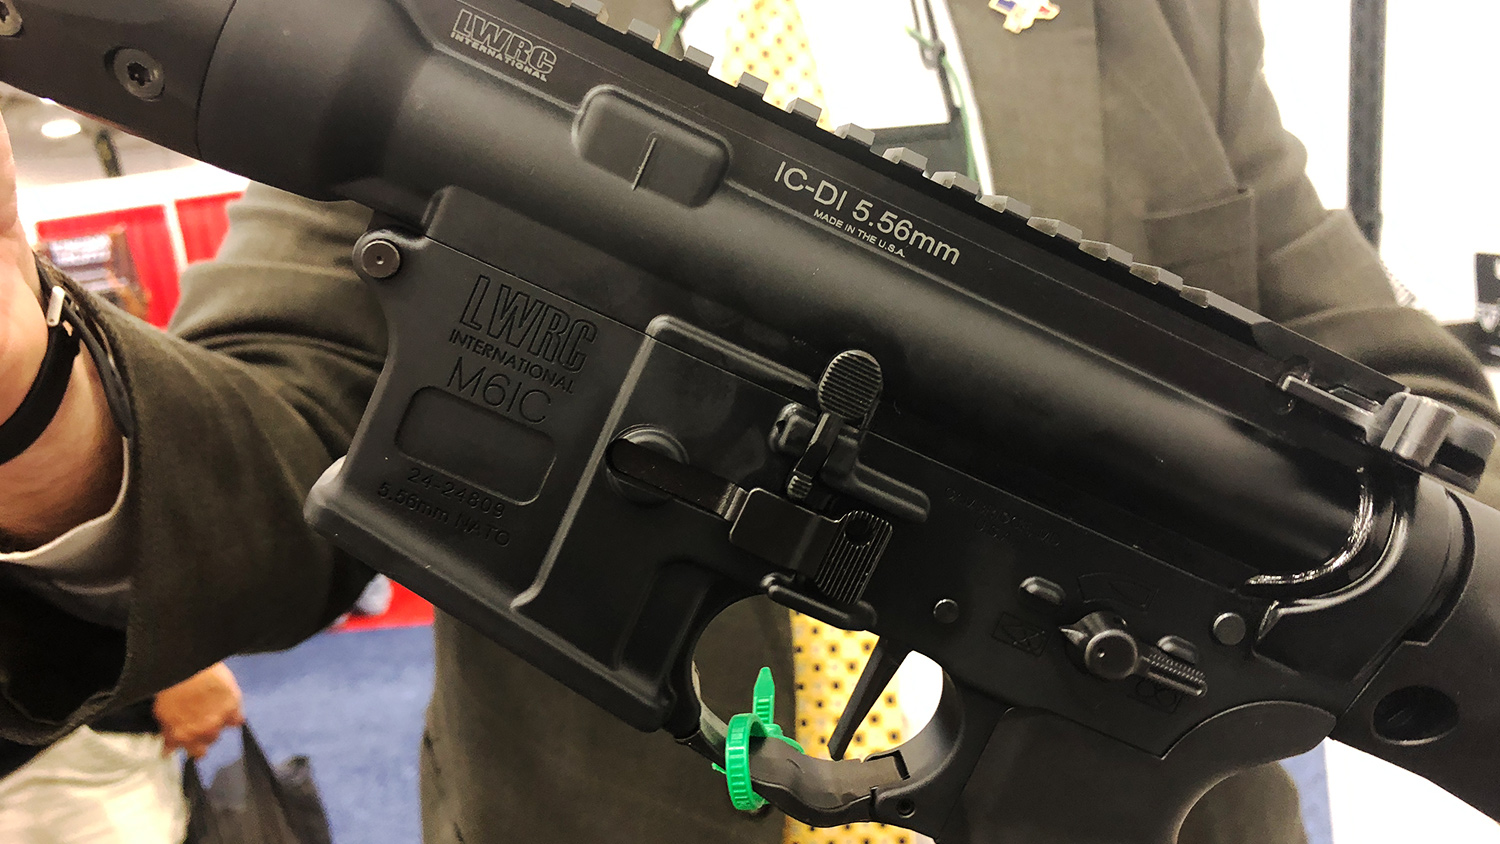 LWRC IC DI Competition Model lower controls and trigger